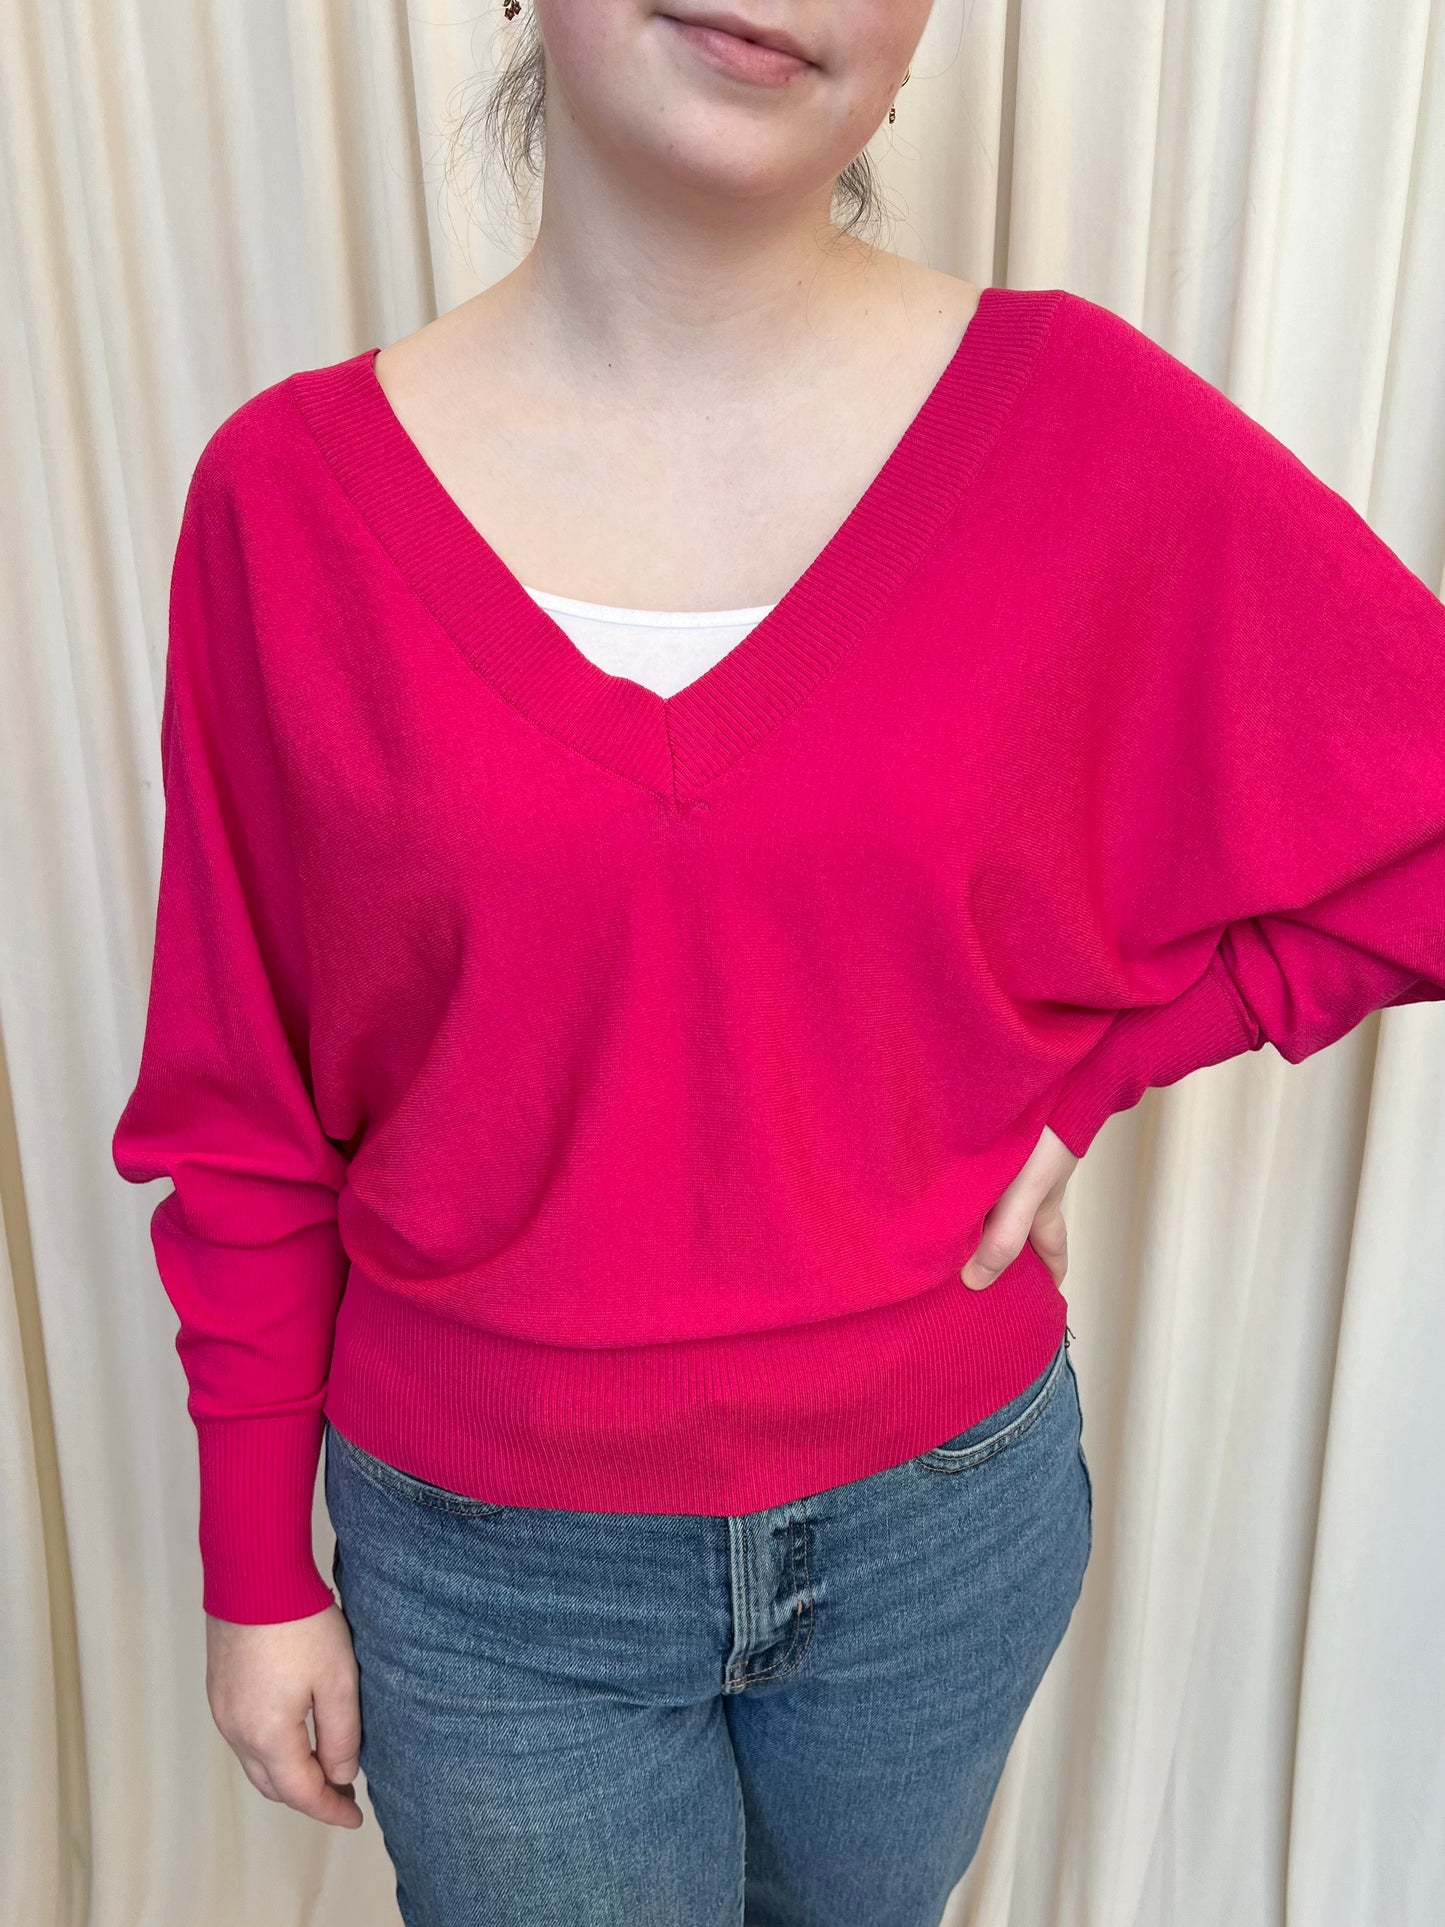 Hot Pink V Neck Sweater - Small